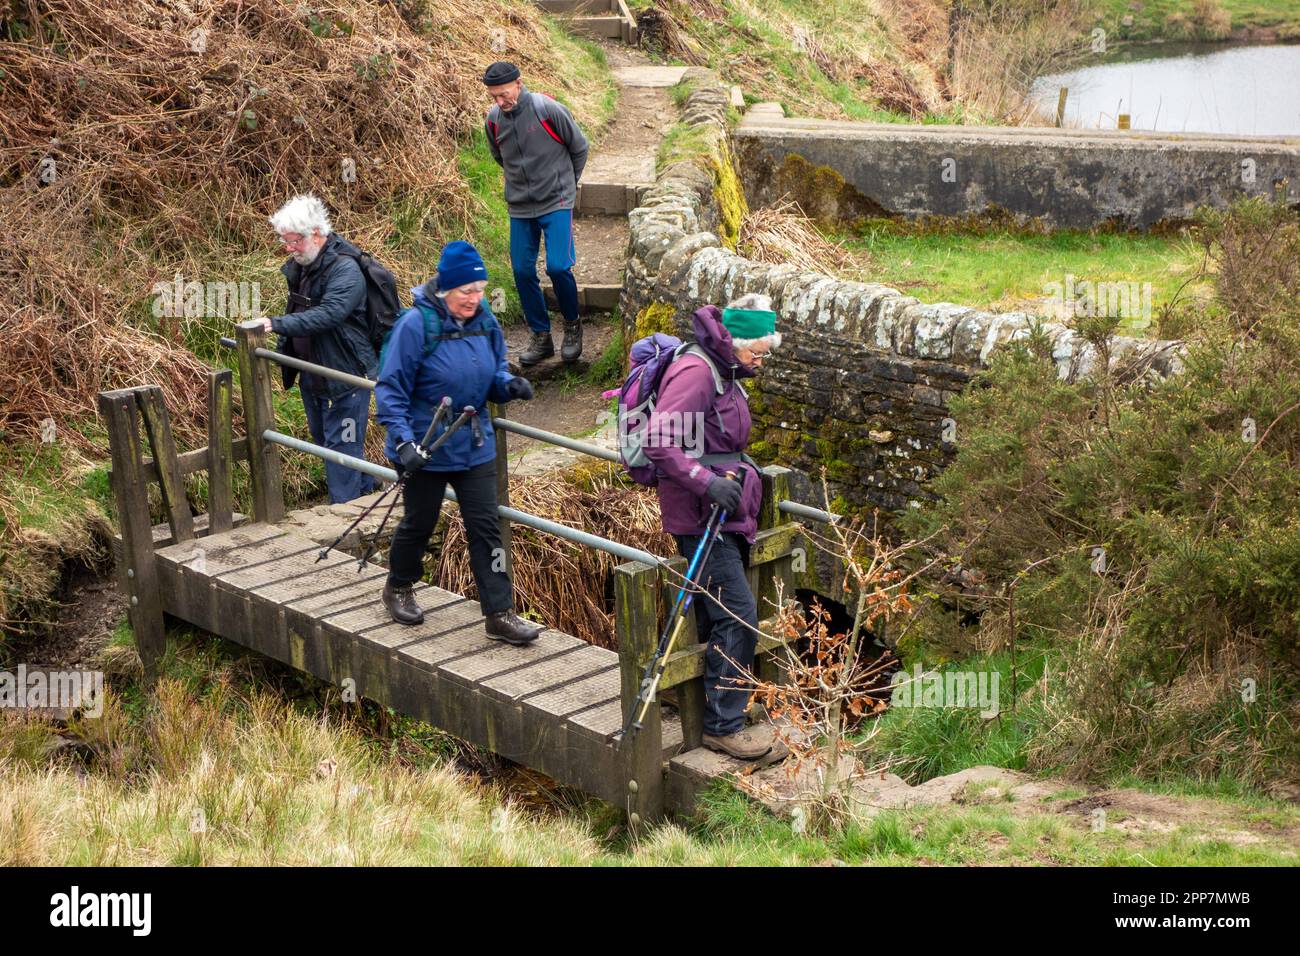 Members of the Sandbach U3A long walking group enjoying rambling in the Peak District hills above the Derbyshire town of Buxton England Stock Photo